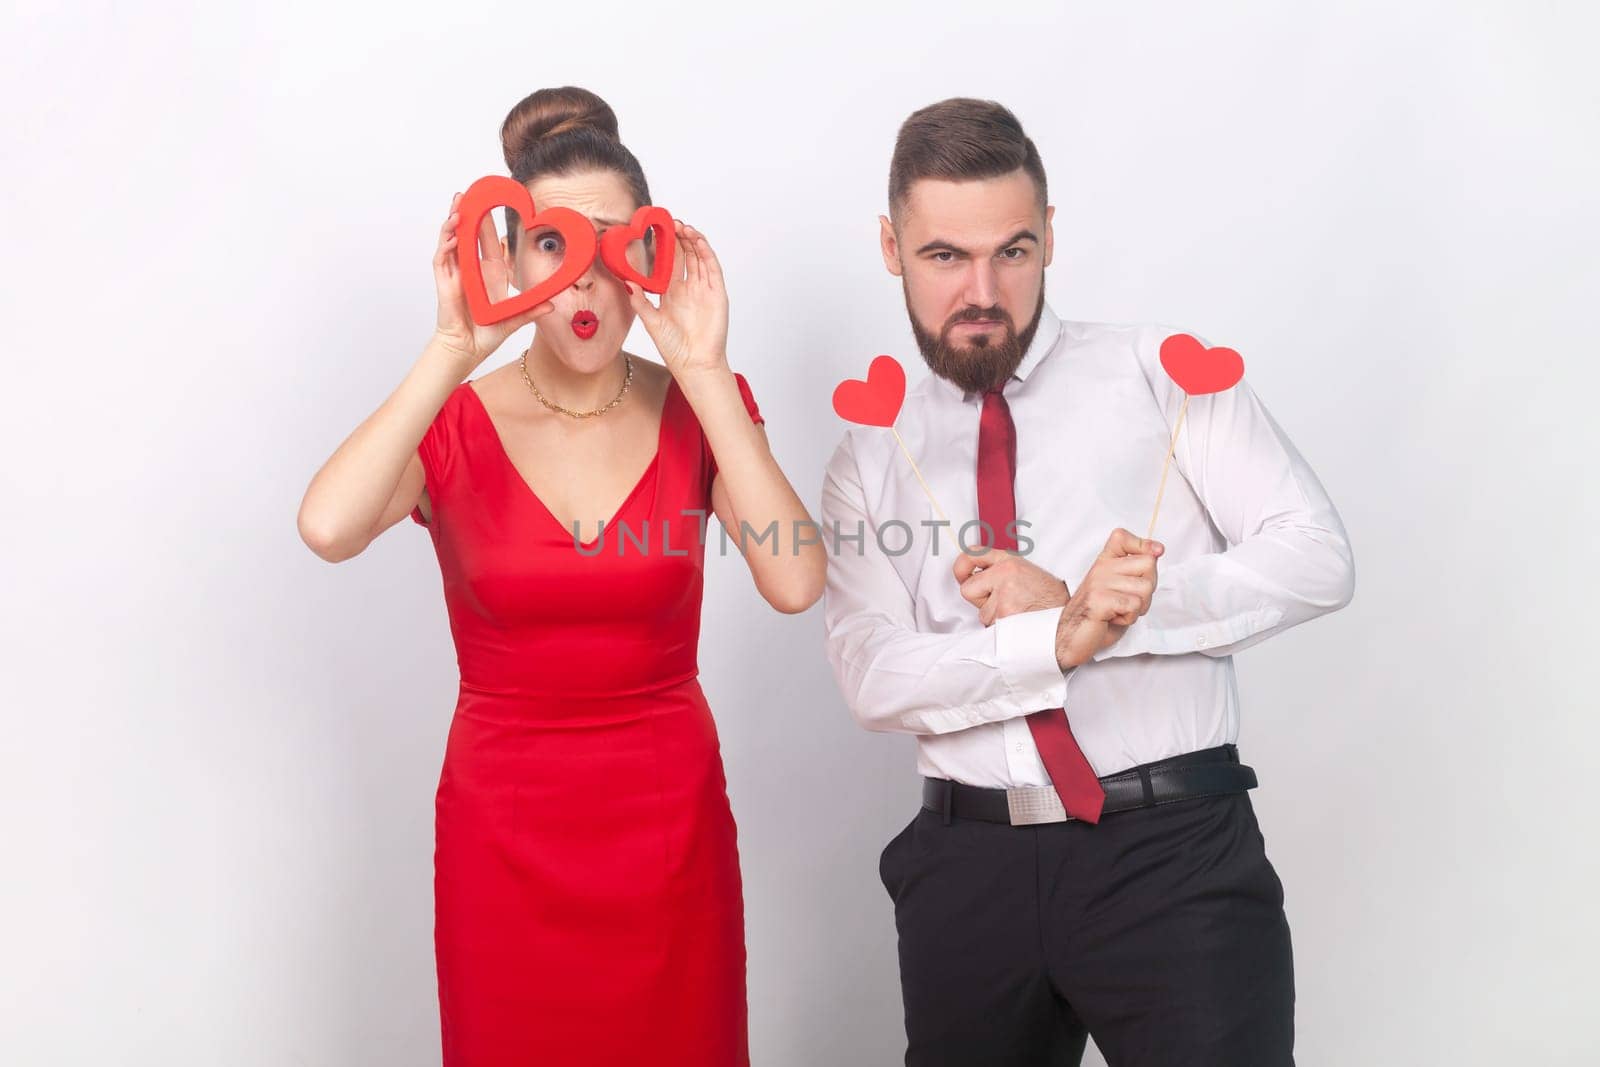 Portrait of strong confident man in white shirt and surprised woman in red dress standing together, holding heart figures, being emotive. Indoor studio shot isolated on gray background.